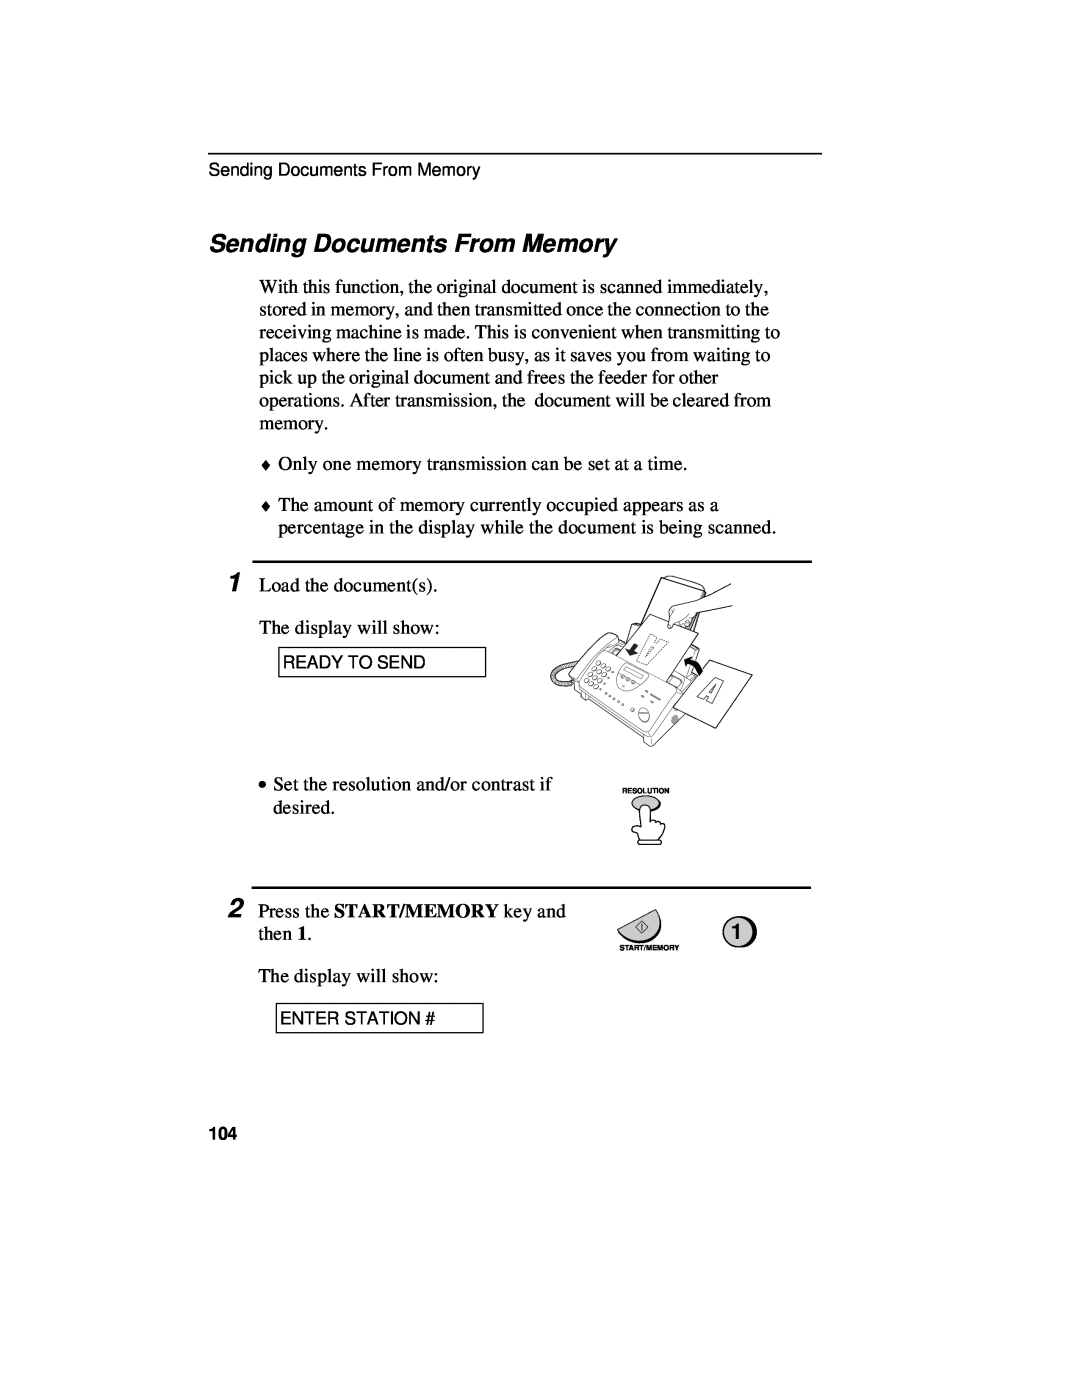 Sharp UX-460 operation manual Sending Documents From Memory 